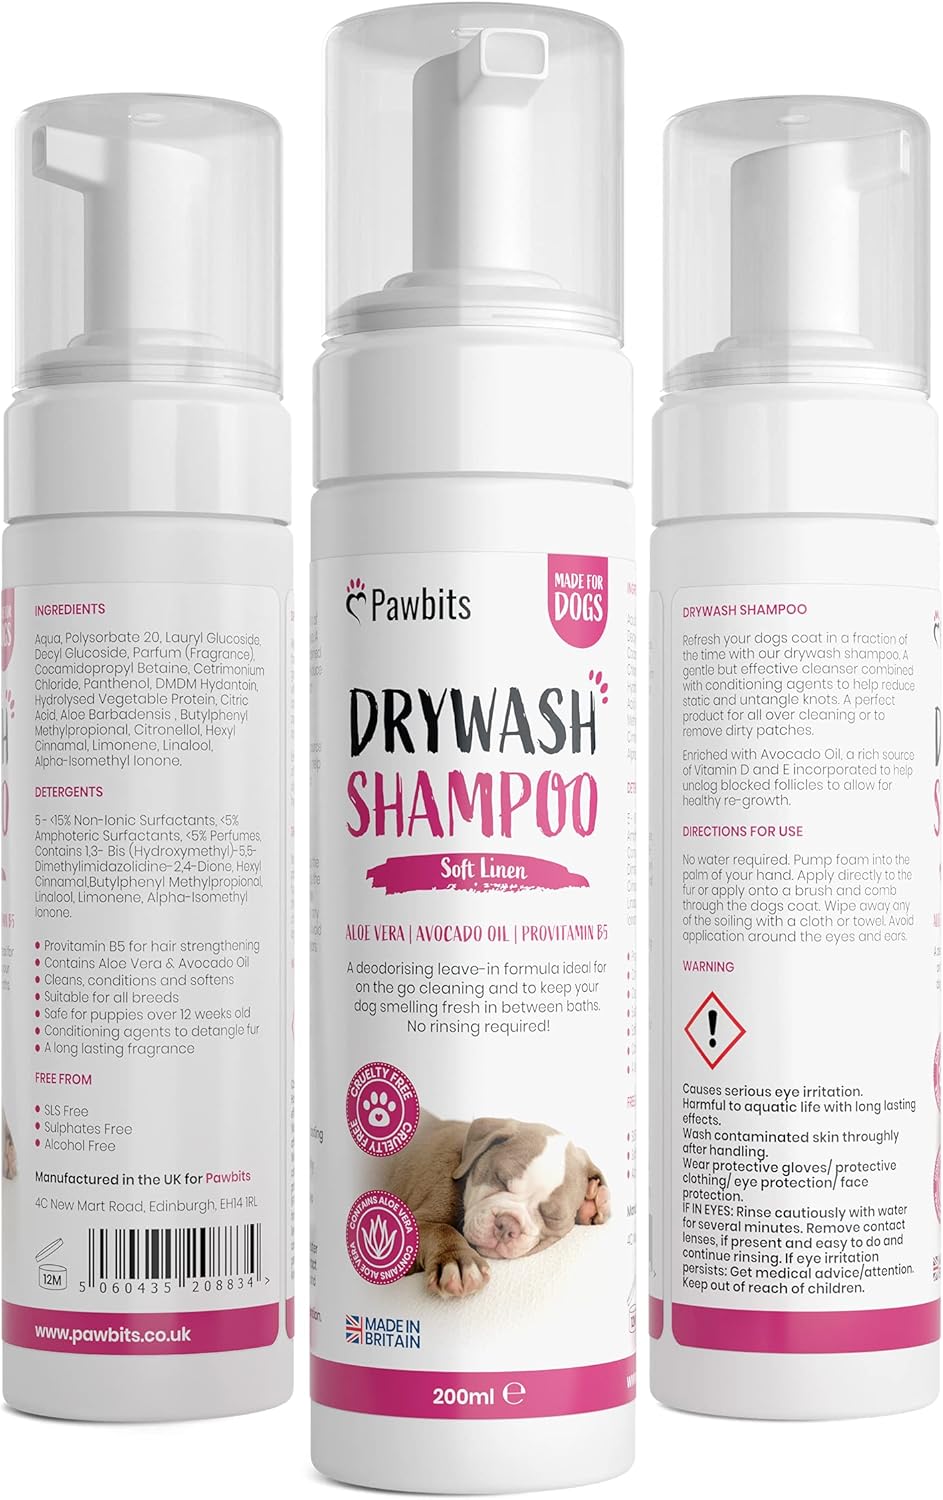 Pawbits Drywash Shampoo for Dogs - Puppy Friendly 3-in-1 Dry Shampoo to Clean, Condition & Detangle – No Water Required (Soft Linen - 200ml)??PB-DRYWASH